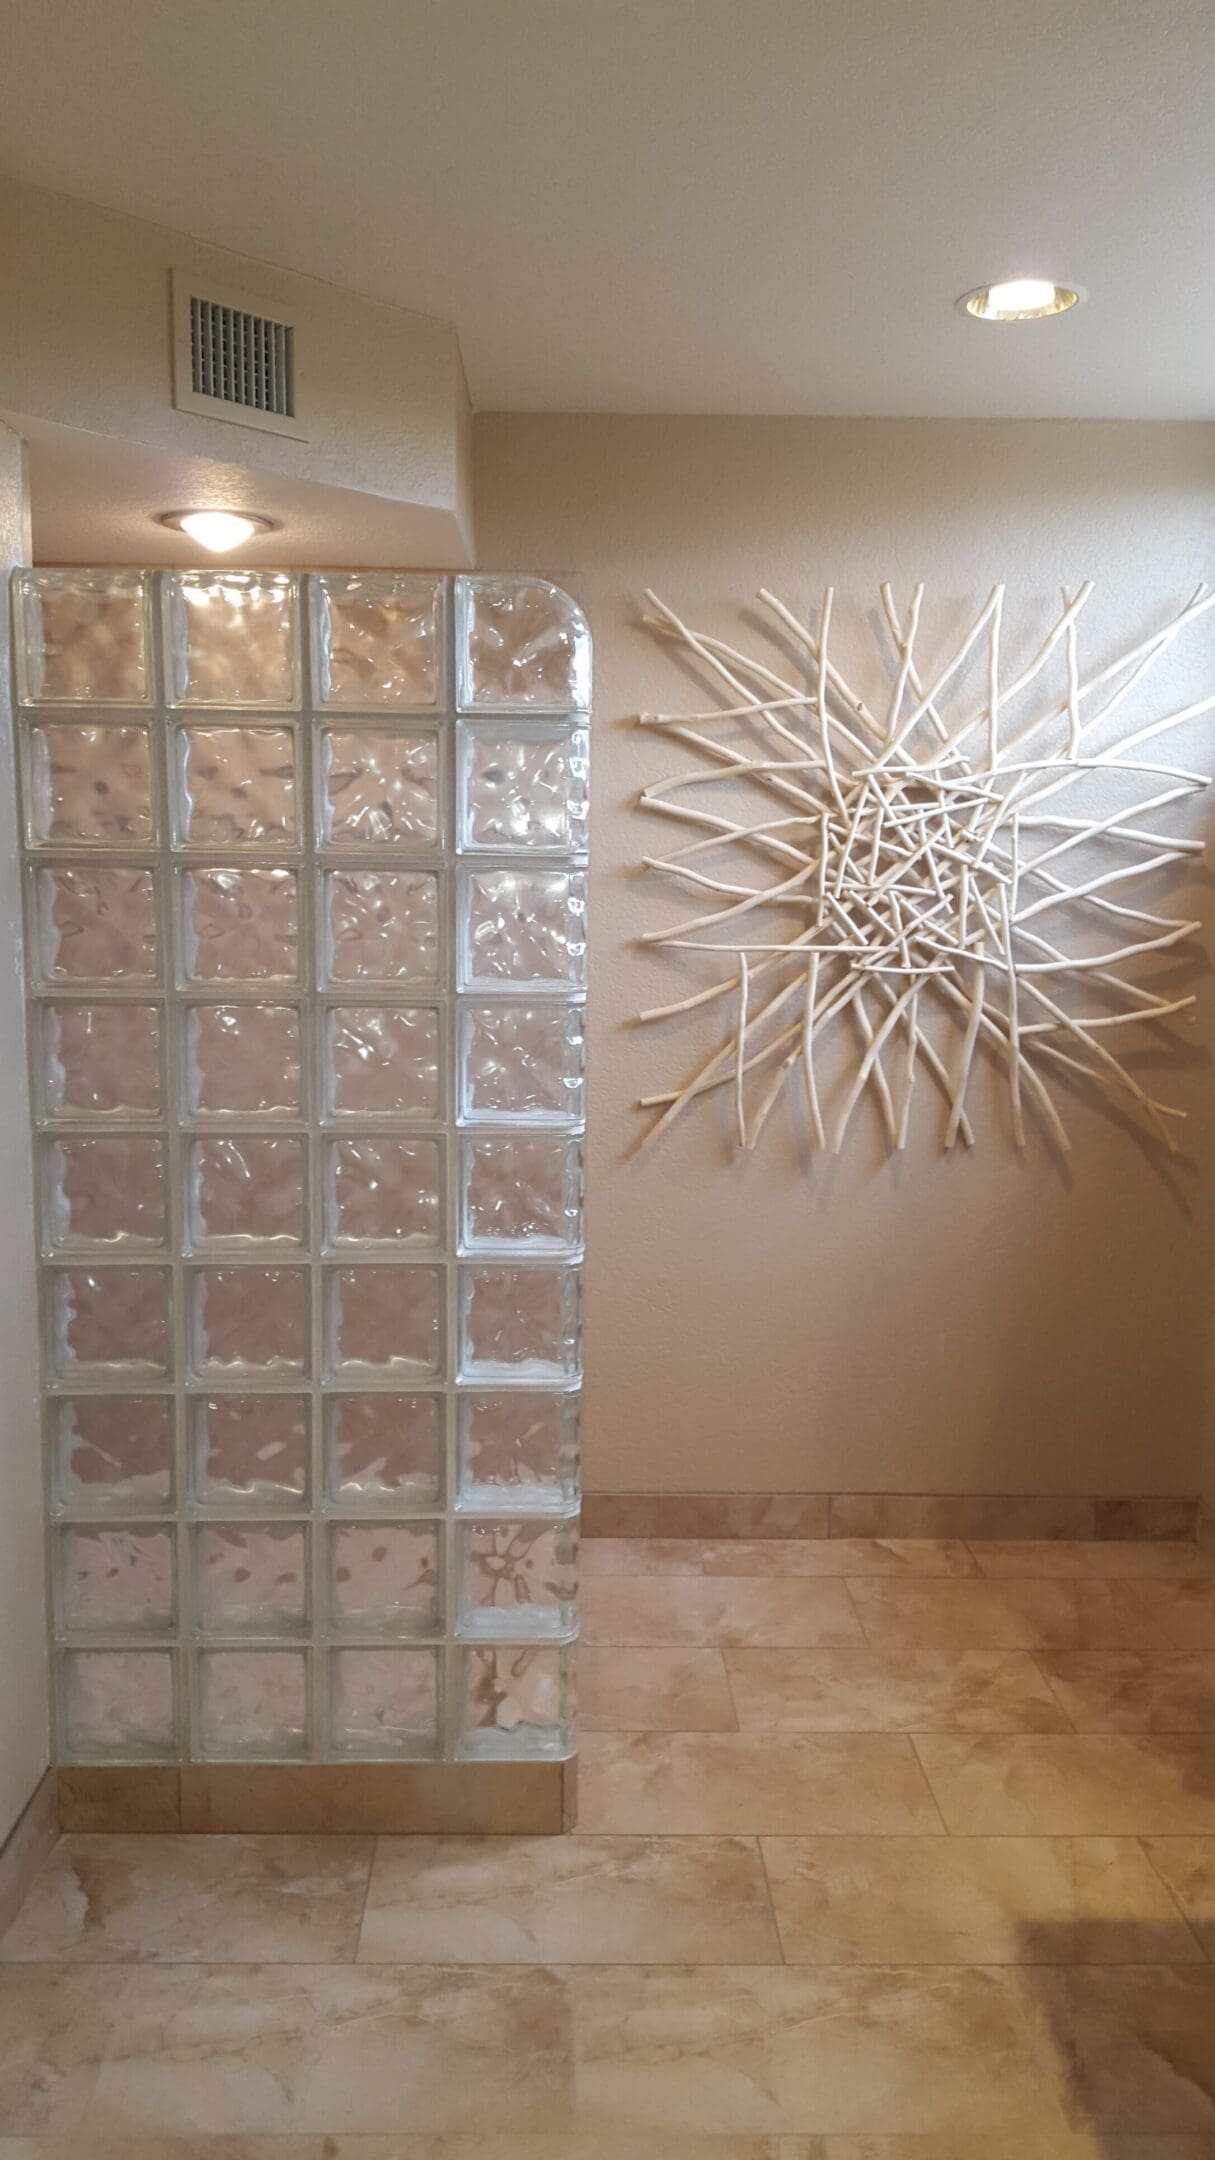 A glass block wall with a white design on the wall.